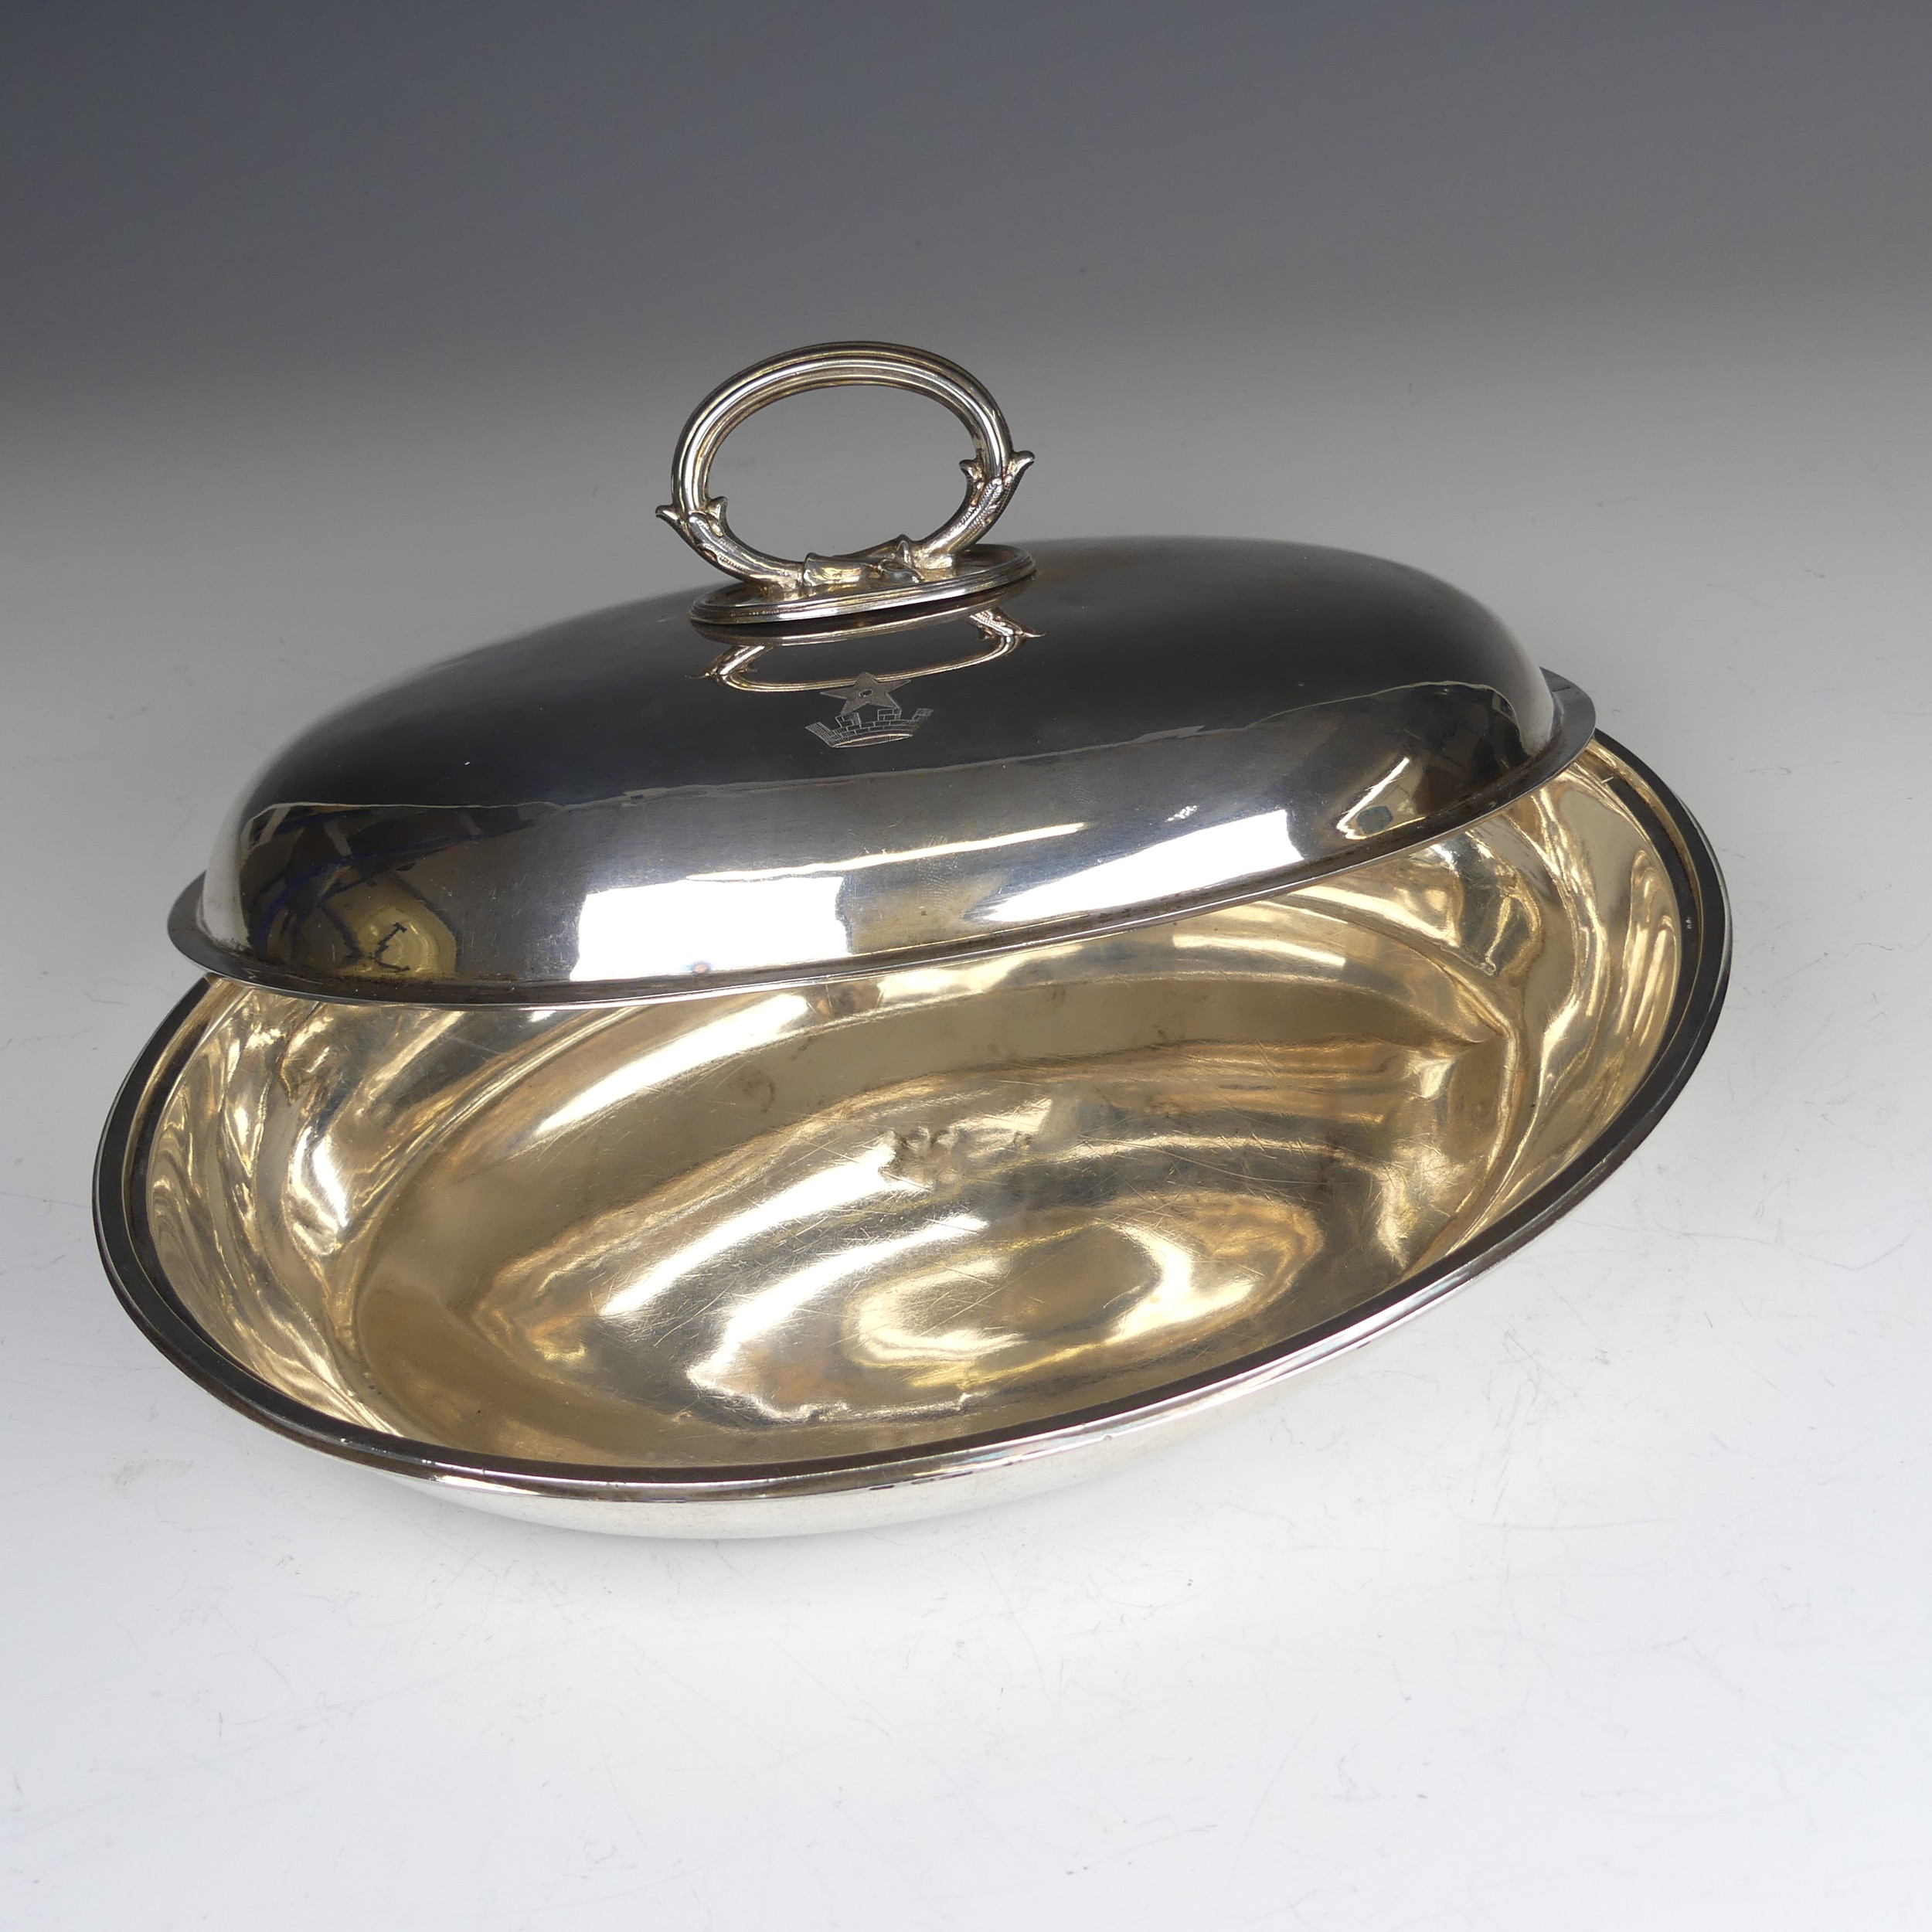 A Victorian oval silver Entrée Dish, hallmarked London 1883, with loop handle, crested with Peile - Image 6 of 9